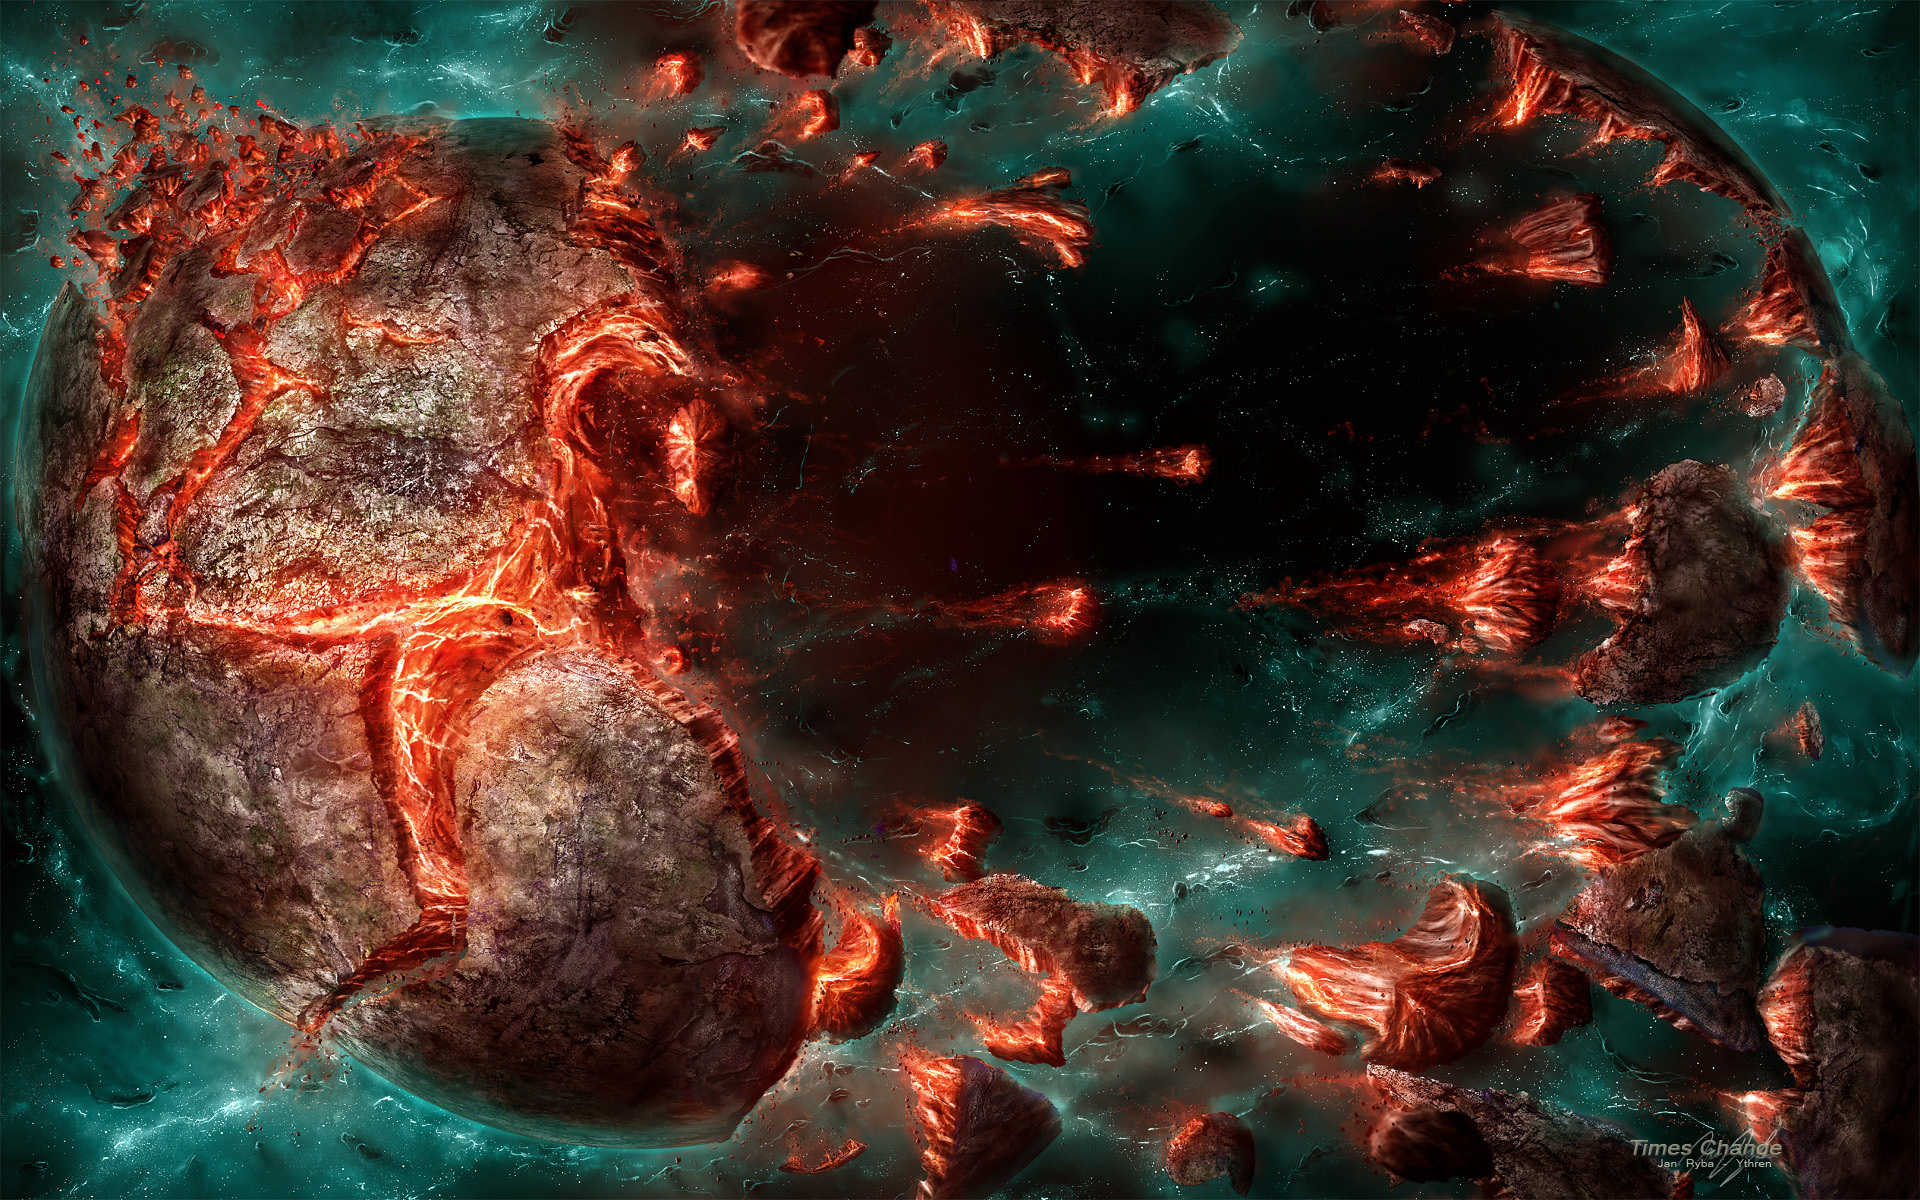 Sci-fi explosion wallpaper. Vibrant colors burst from the center, electrifying the scene with dynamic energy.